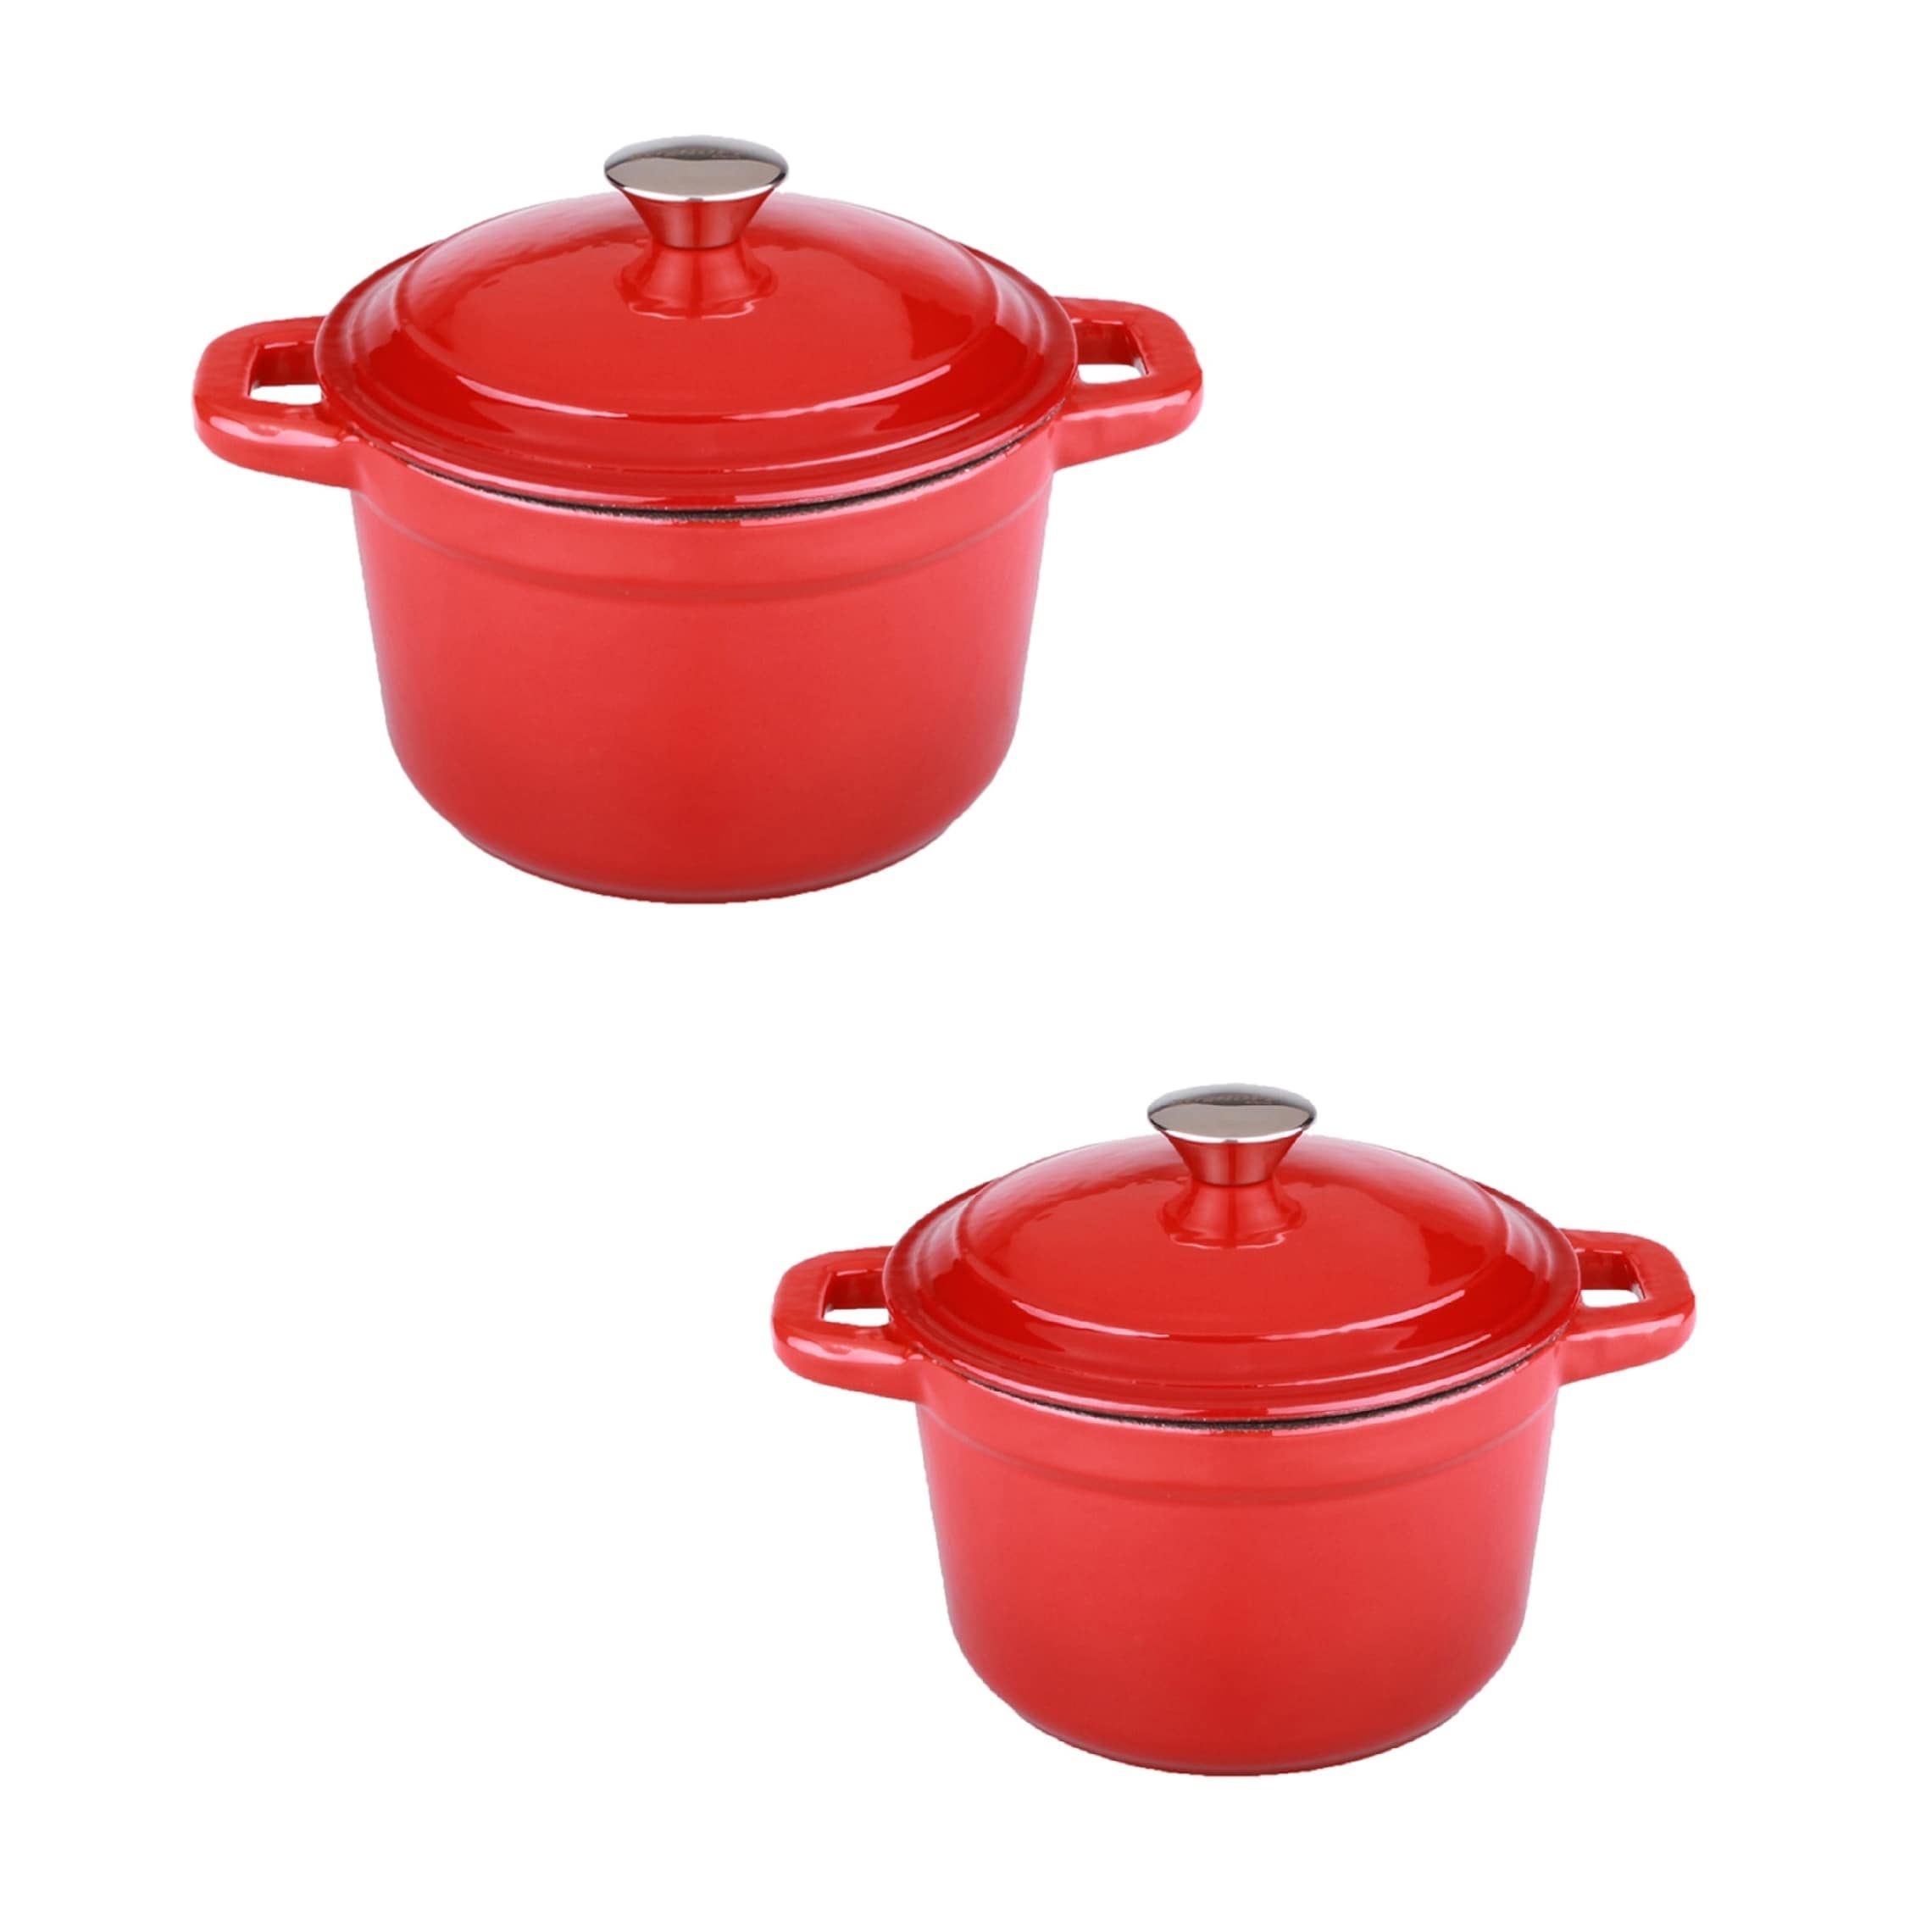 https://ak1.ostkcdn.com/images/products/18226716/Neo-Cast-Iron-4pc-Set-3-7Qt-Covd-Red-0c4ea65c-0bad-476a-bf28-46b74c85c44d.jpg